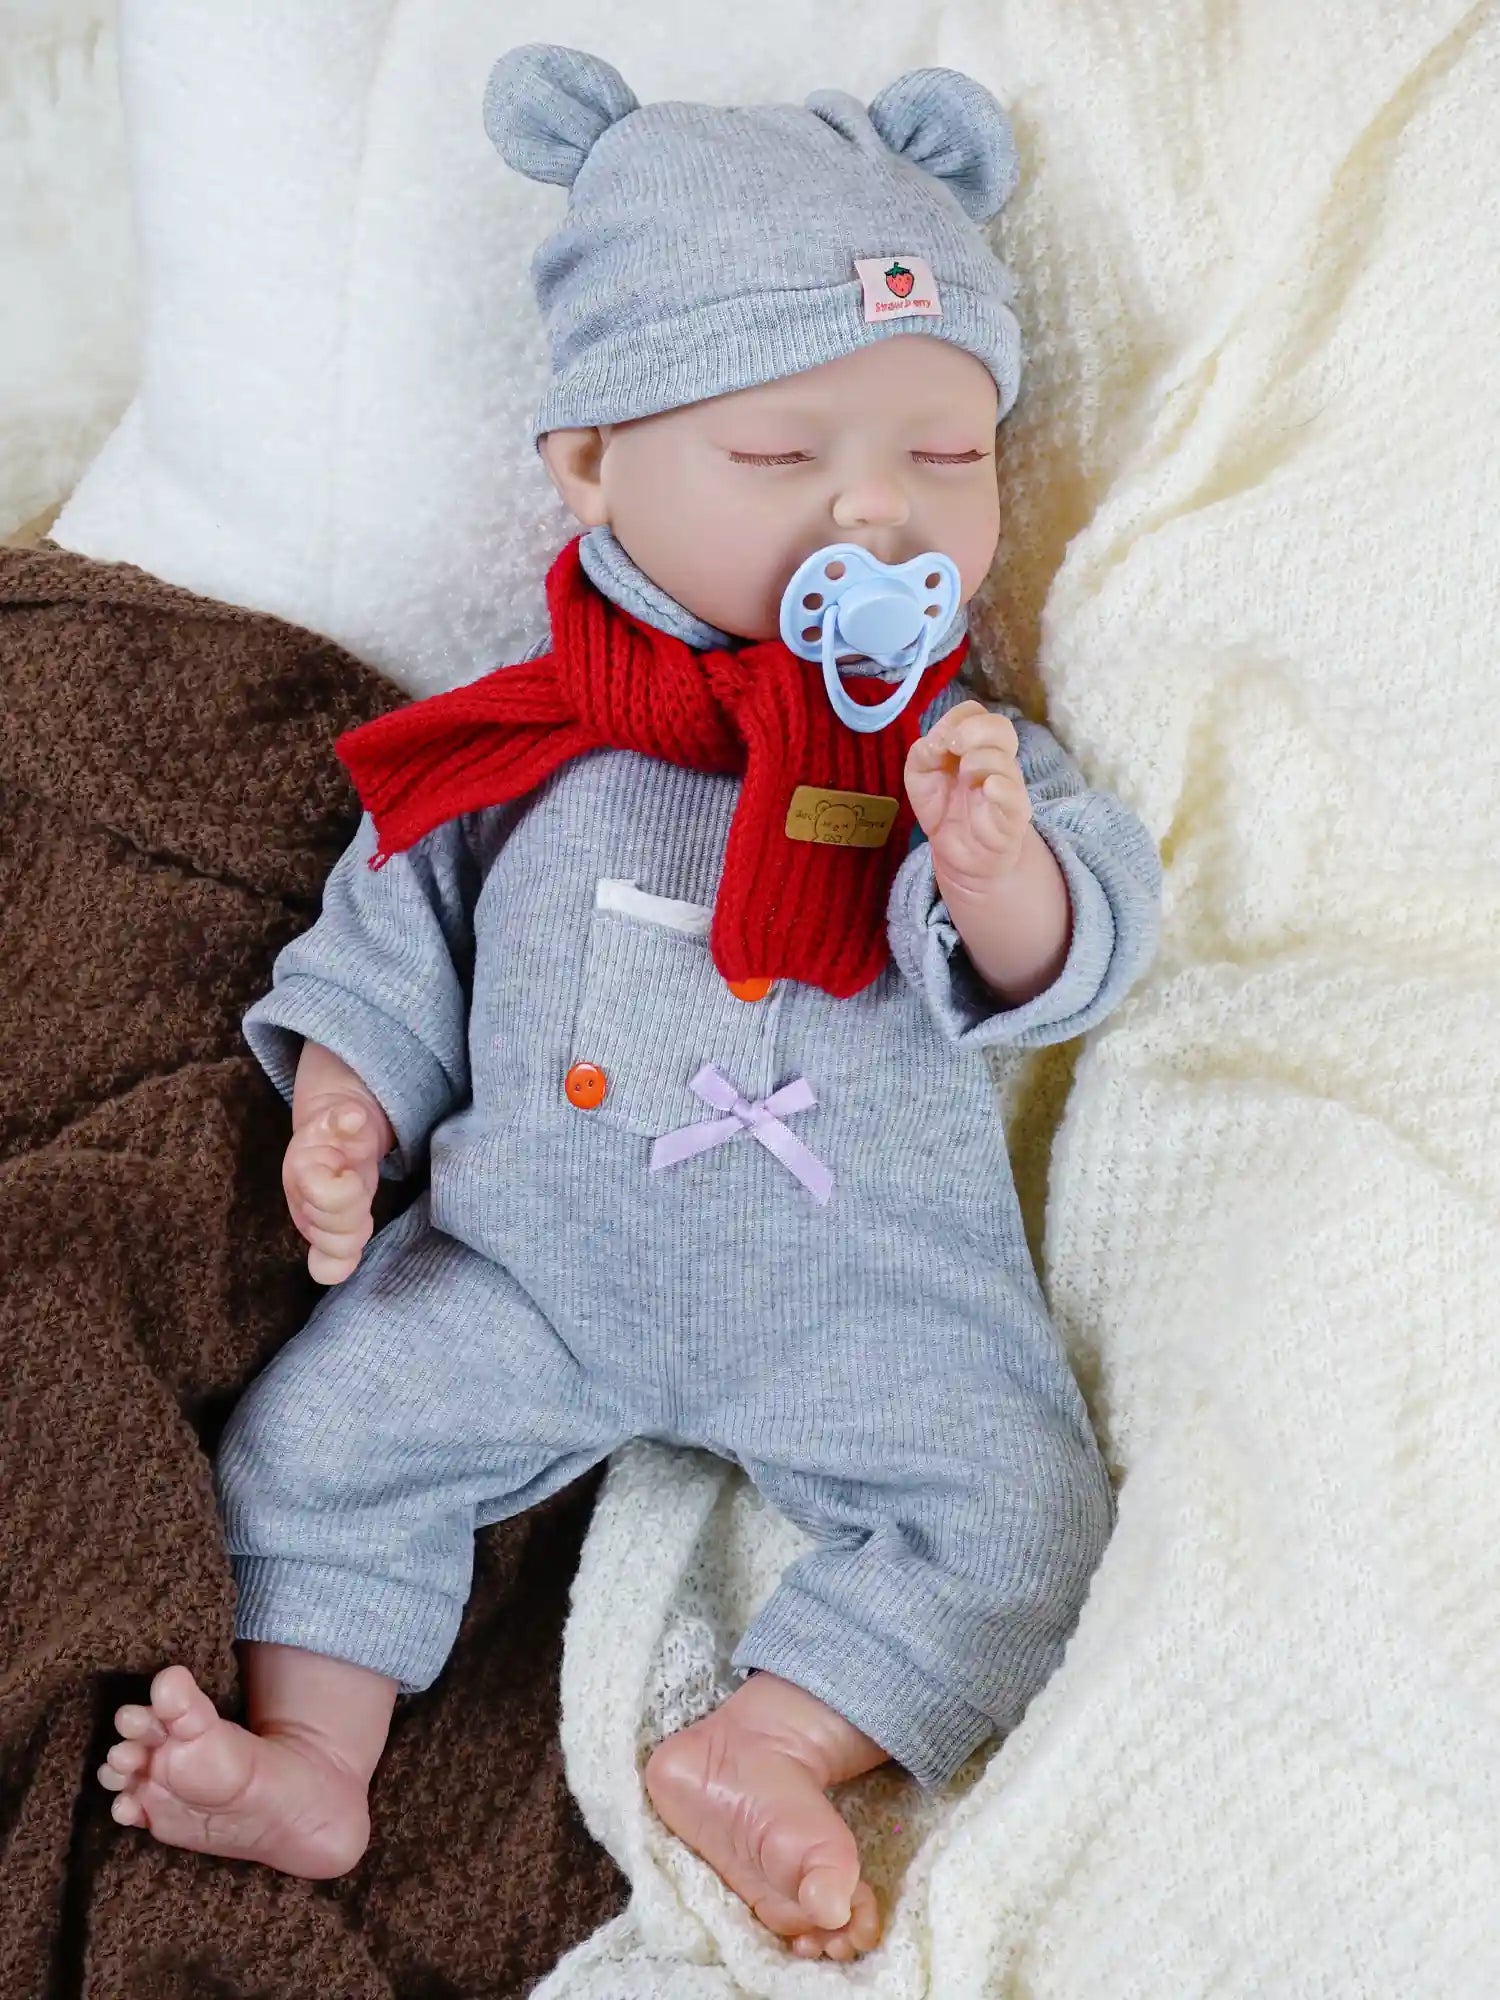 A baby doll dressed in a grey outfit with a matching hat and a red scarf, lying on a soft blanket with a blue pacifier in its mouth and eyes closed, giving it a peaceful, sleeping appearance.